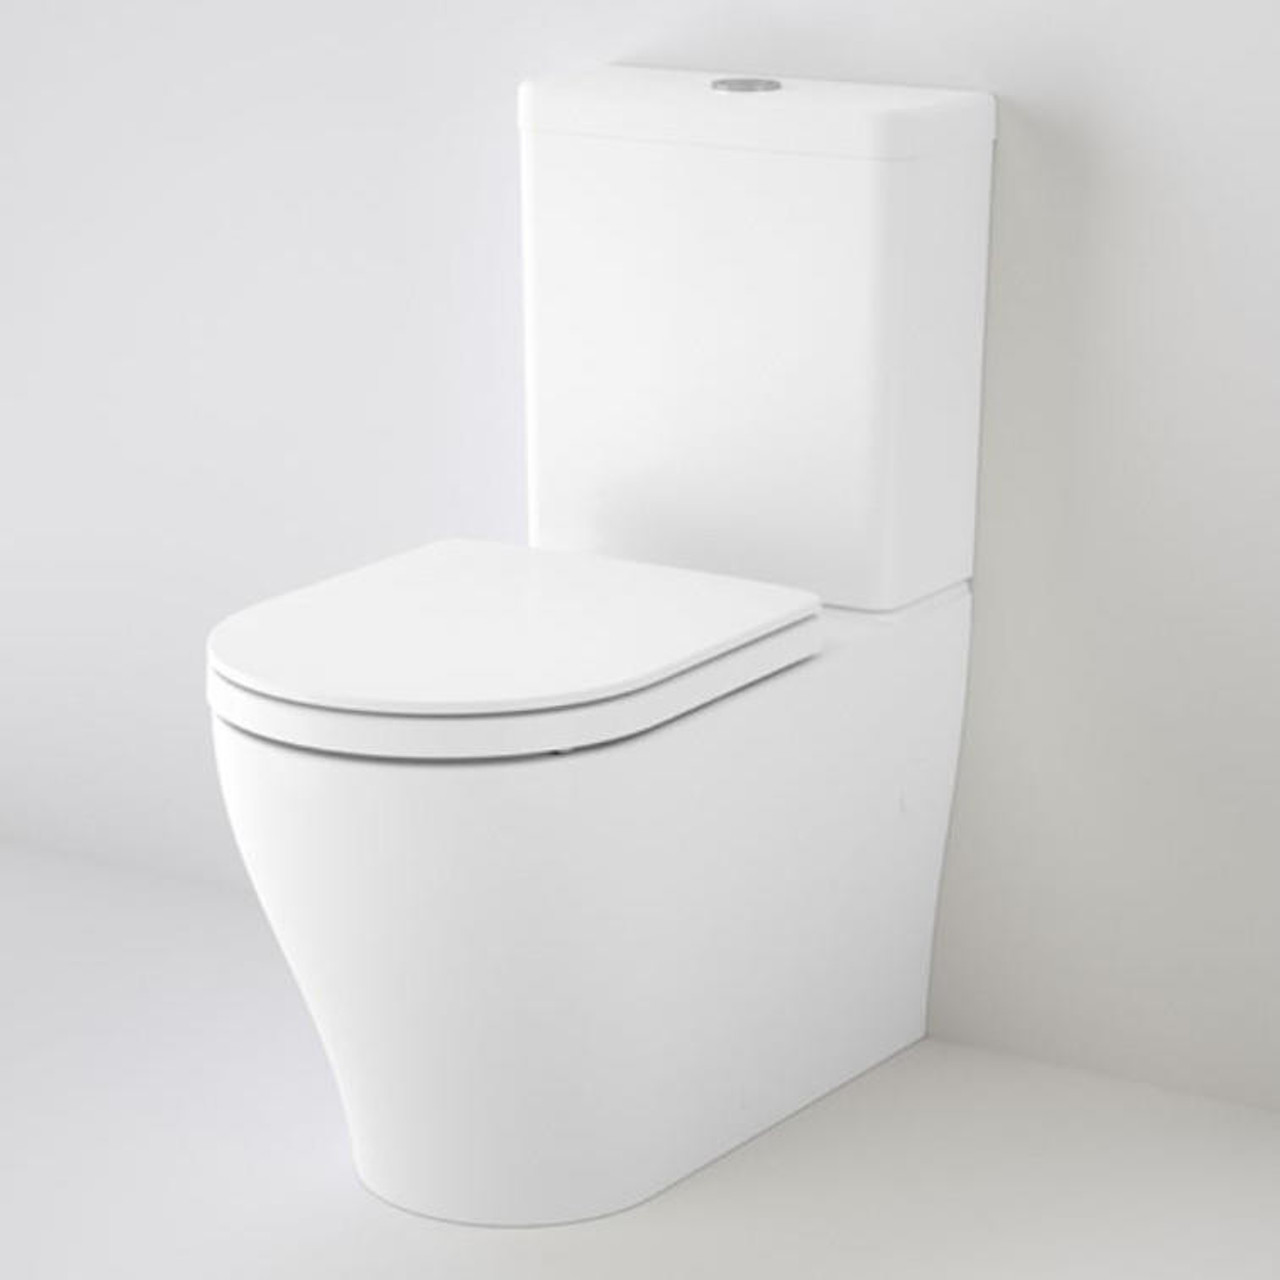 CAROMA LUNA PLUS CLEANFLUSH BOTTOM ENTRY INLET WALL FACED TOILET SUITE